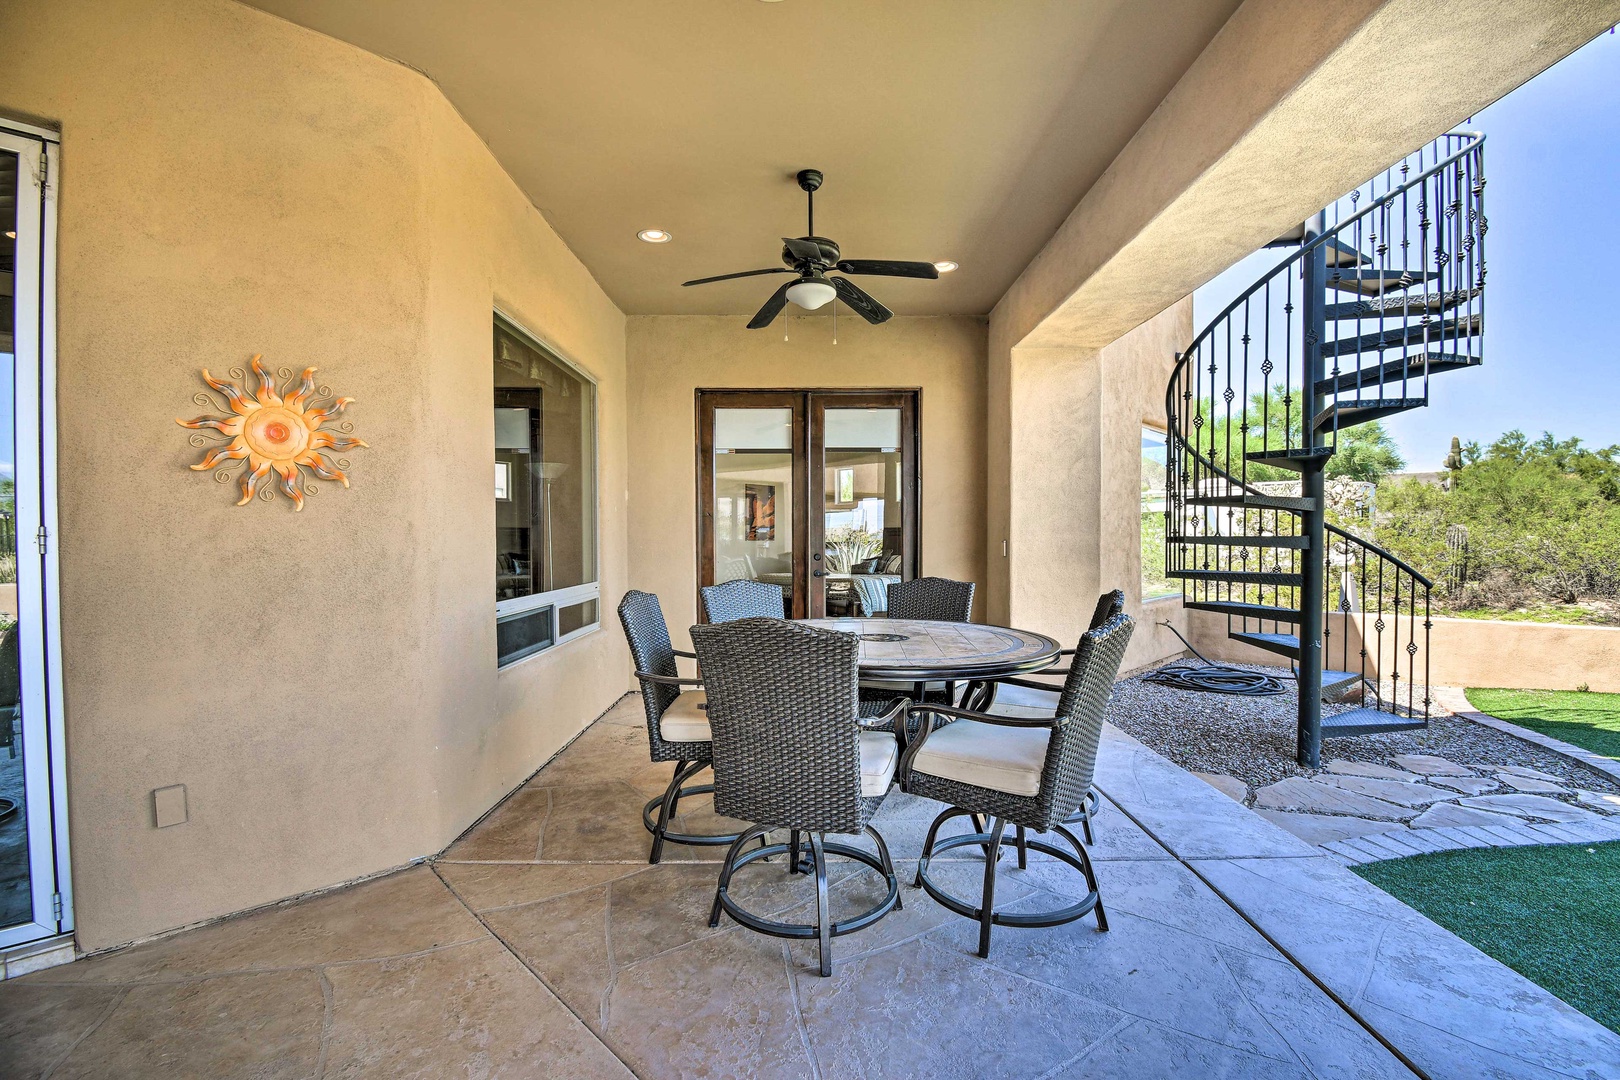 Enjoy a meal or an evening beverage in the shade on the spacious patio